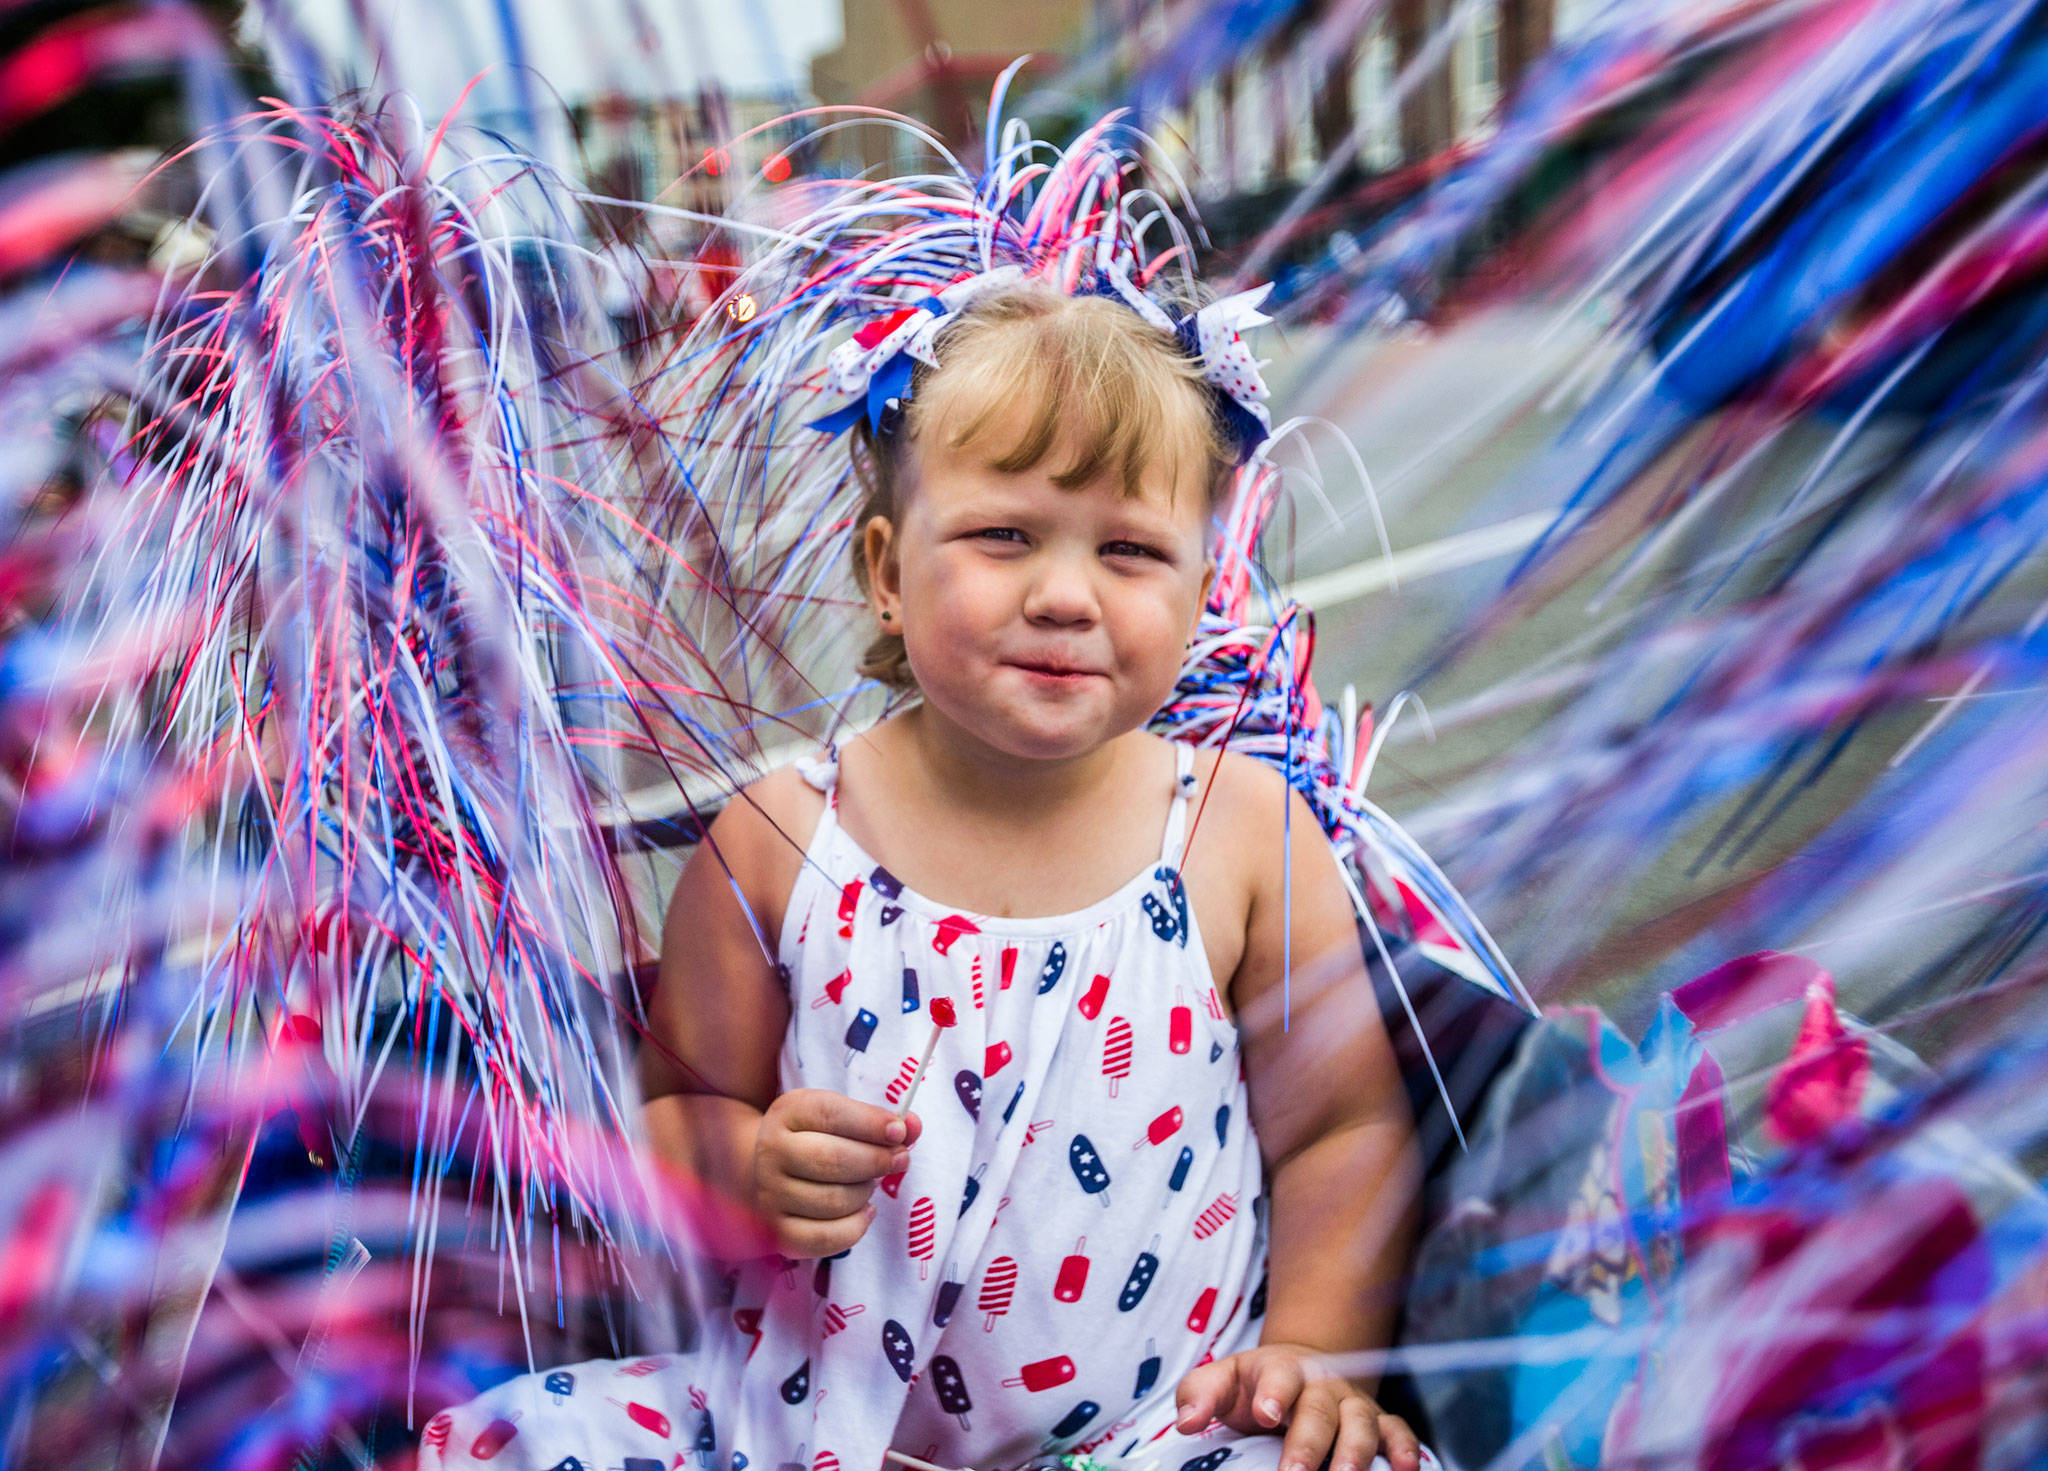 Gallery: Everett’s Colors of Freedom Fourth of July Parade | HeraldNet.com